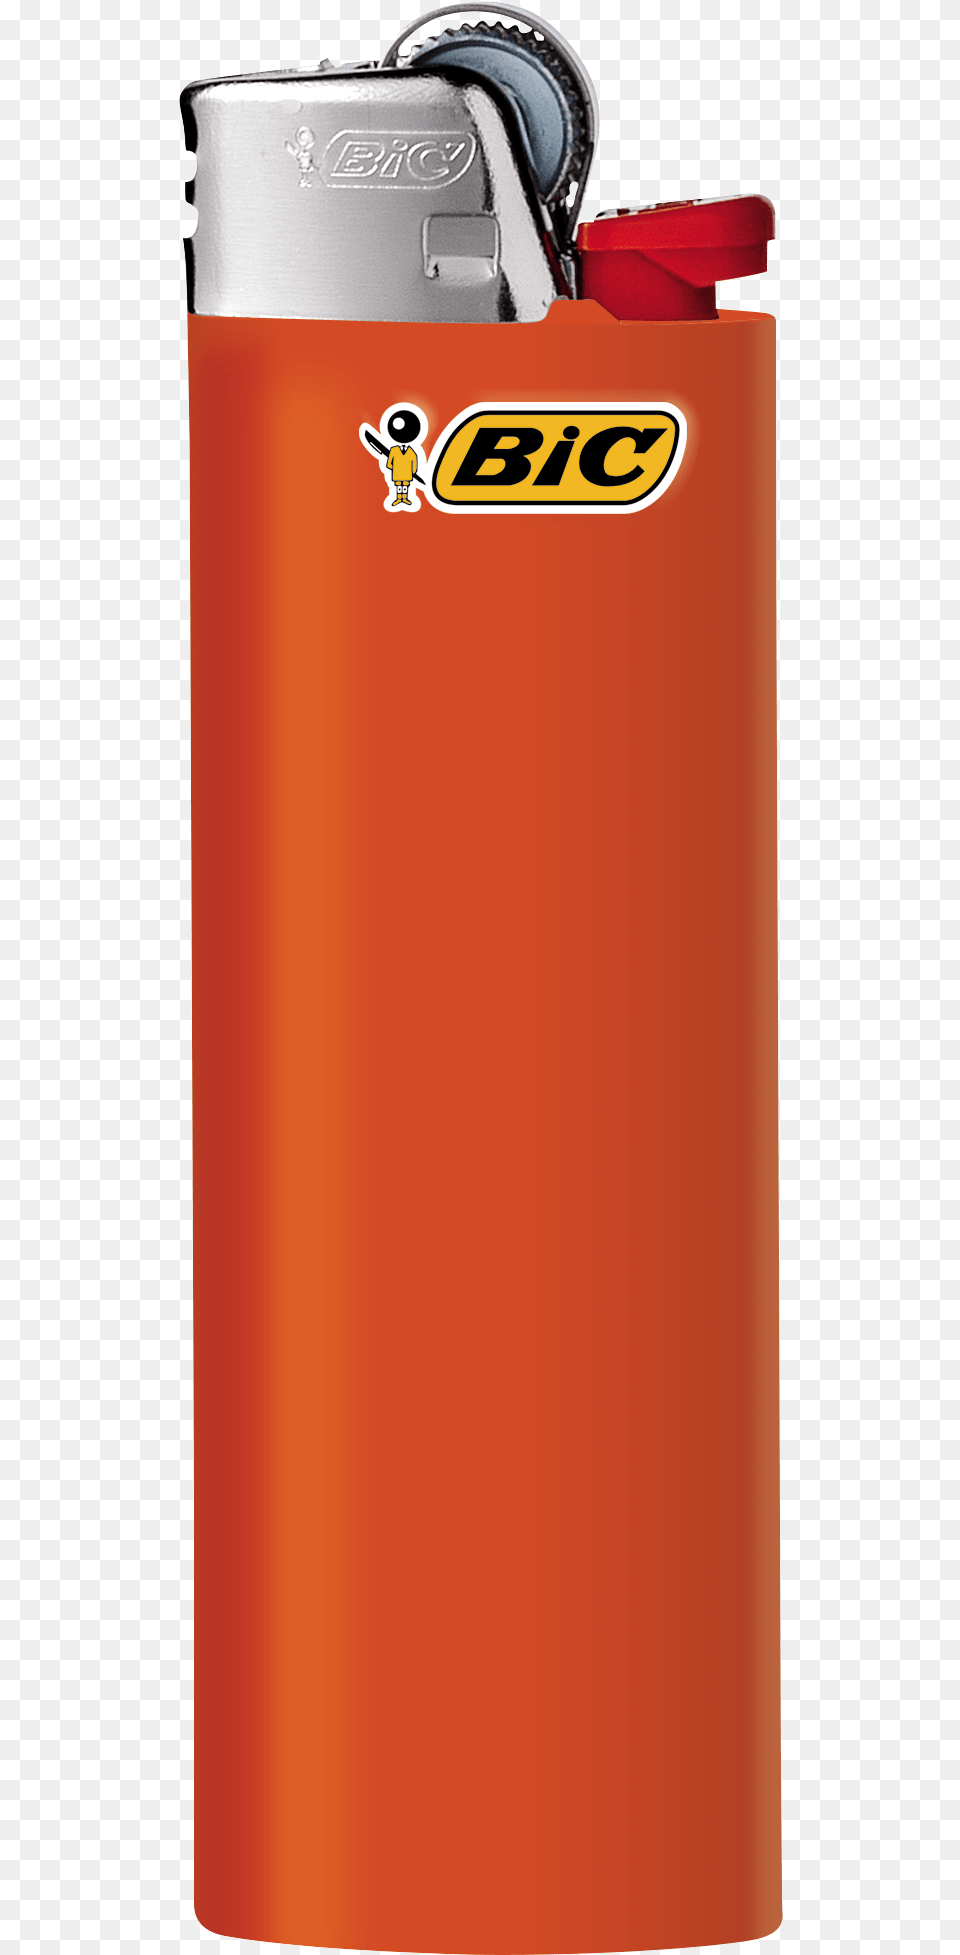 Bic J26 Maxi Lighter Ignites Up To A Maximum Of Approximately Bic Png